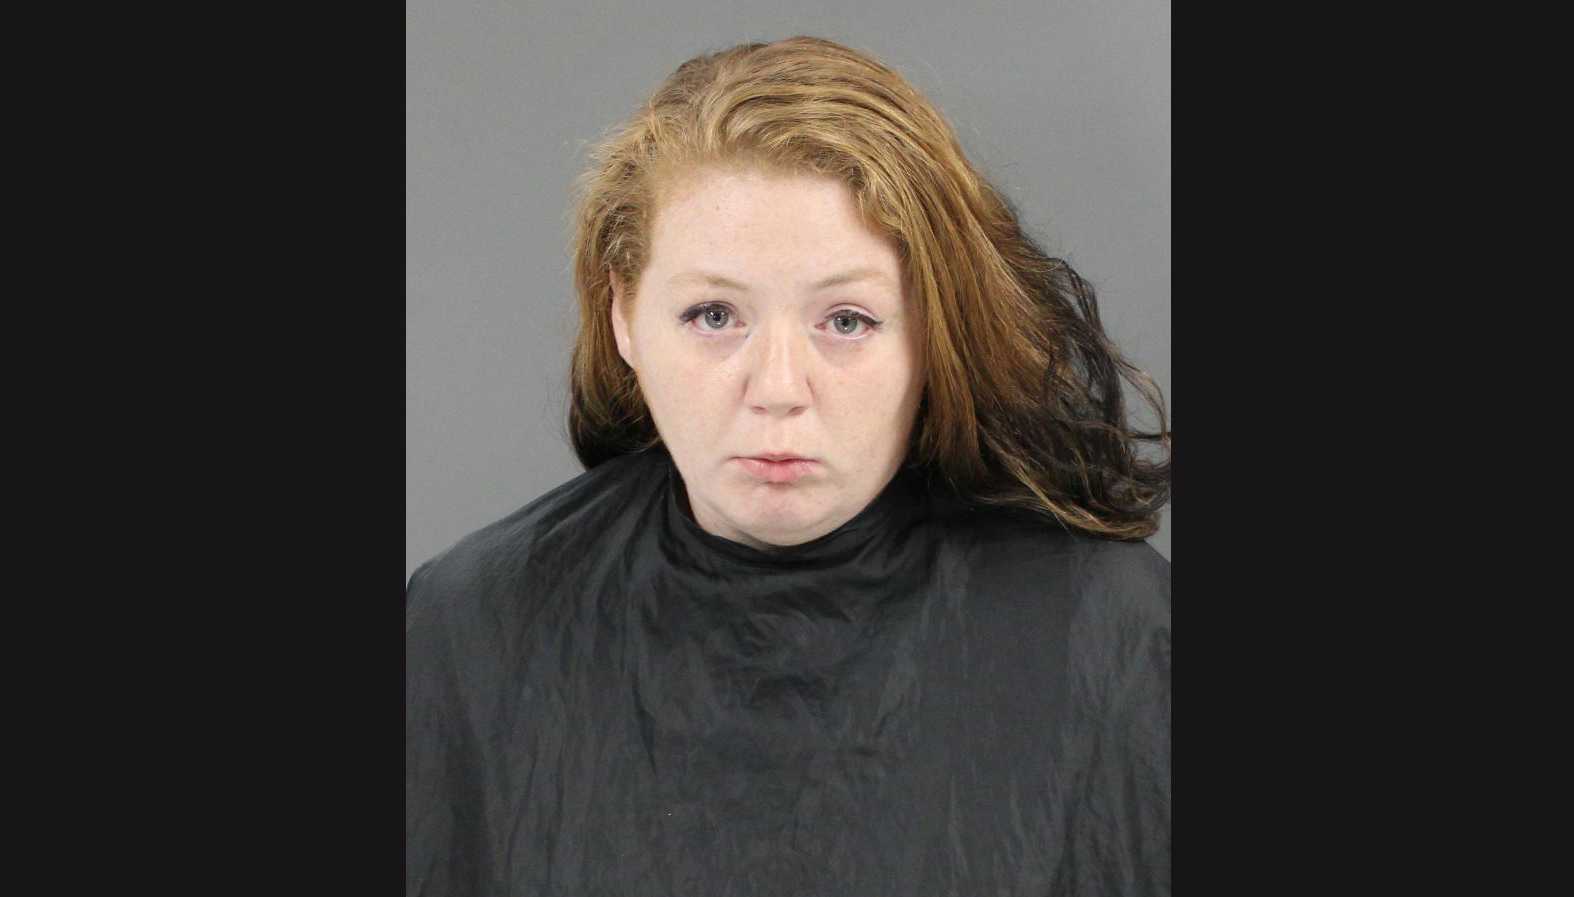 South Carolina Anderson woman child sexual material charges pic